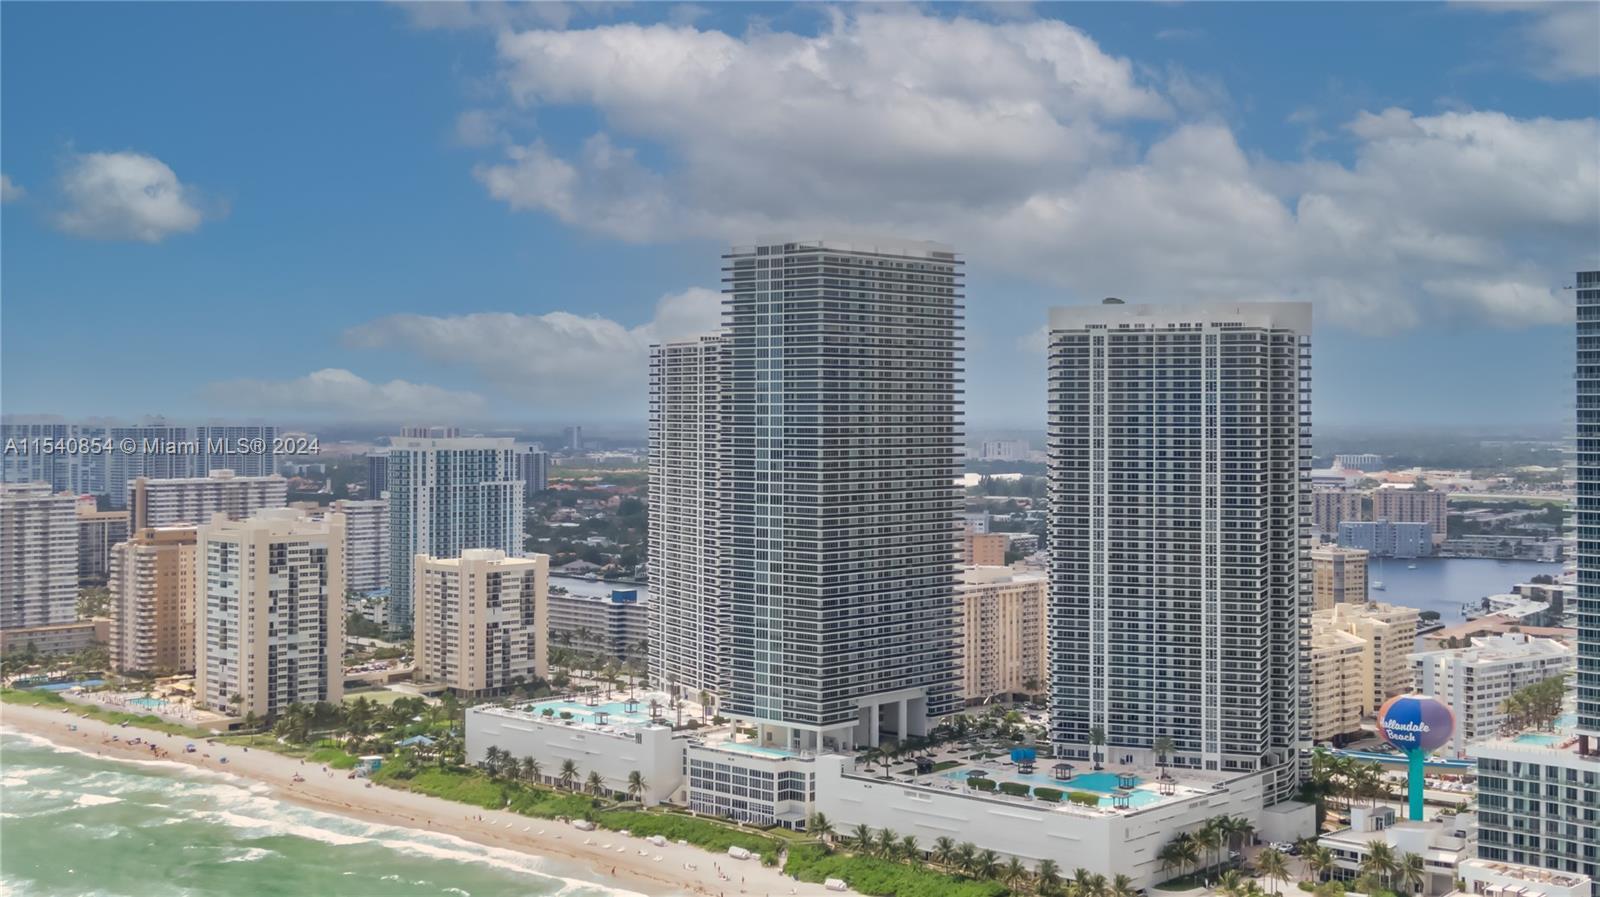 Welcome to Beach Club two in Hallandale – where luxury meets comfort! This spacious 3-bed, 3-bath co